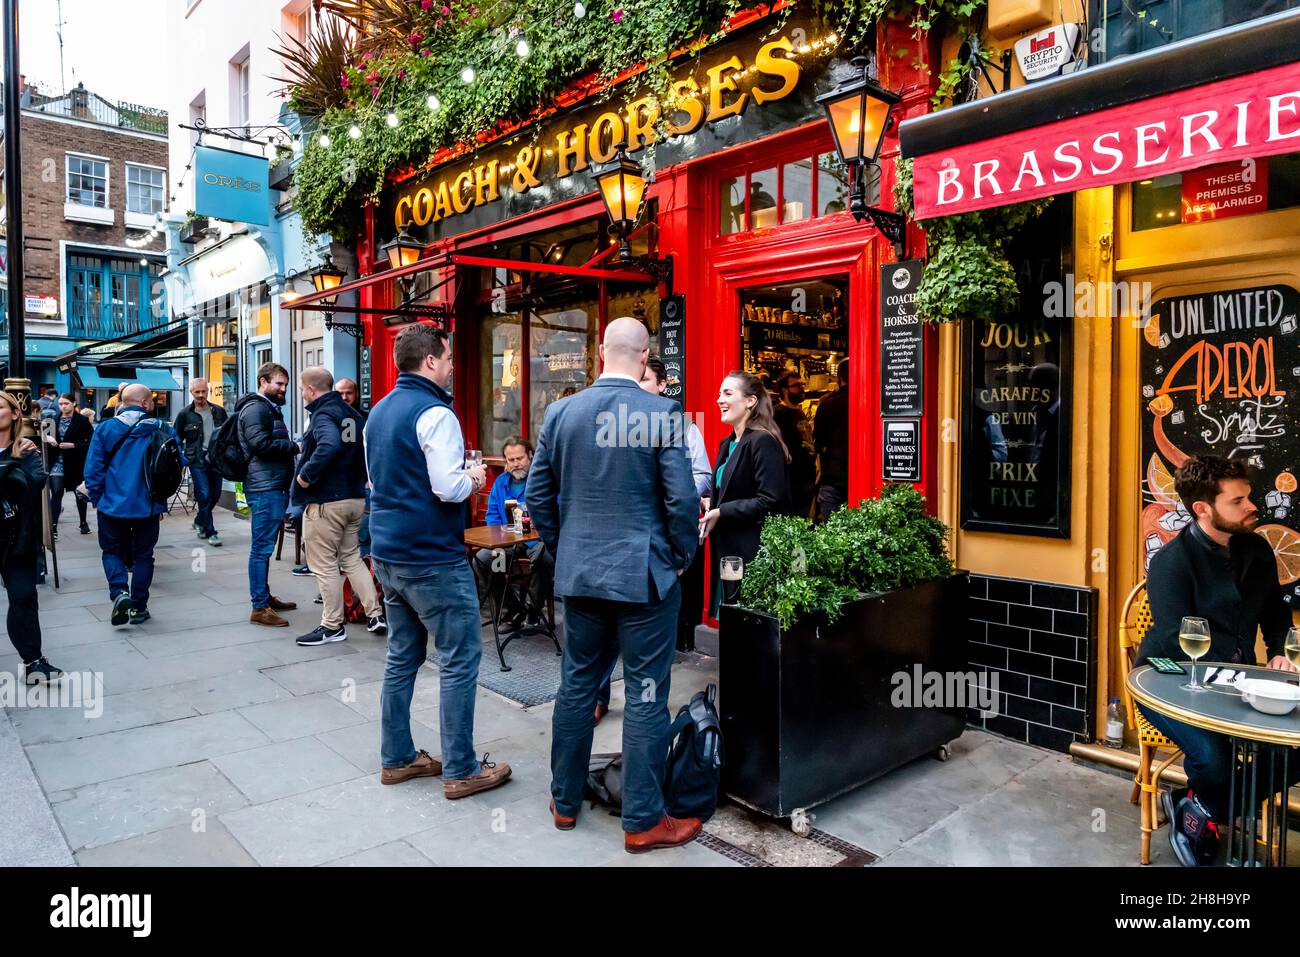 Customers Outside The Coach and Horses Pub In Wellington Street, Covent Garden, London, UK. Stock Photo